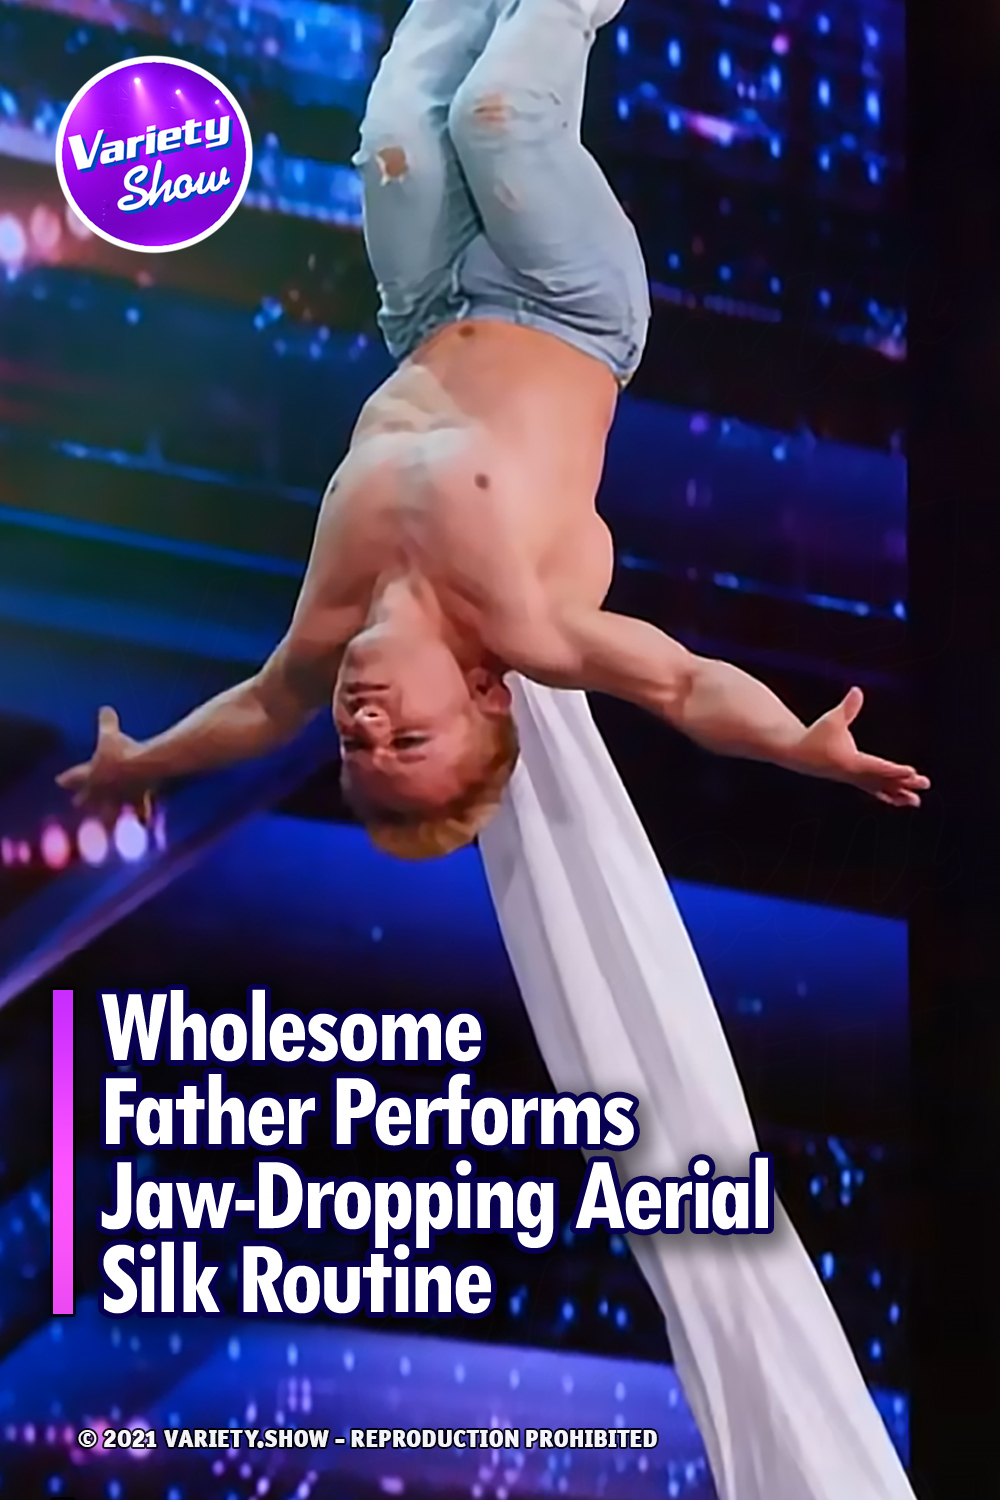 Wholesome Father Performs Jaw-Dropping Aerial Silk Routine